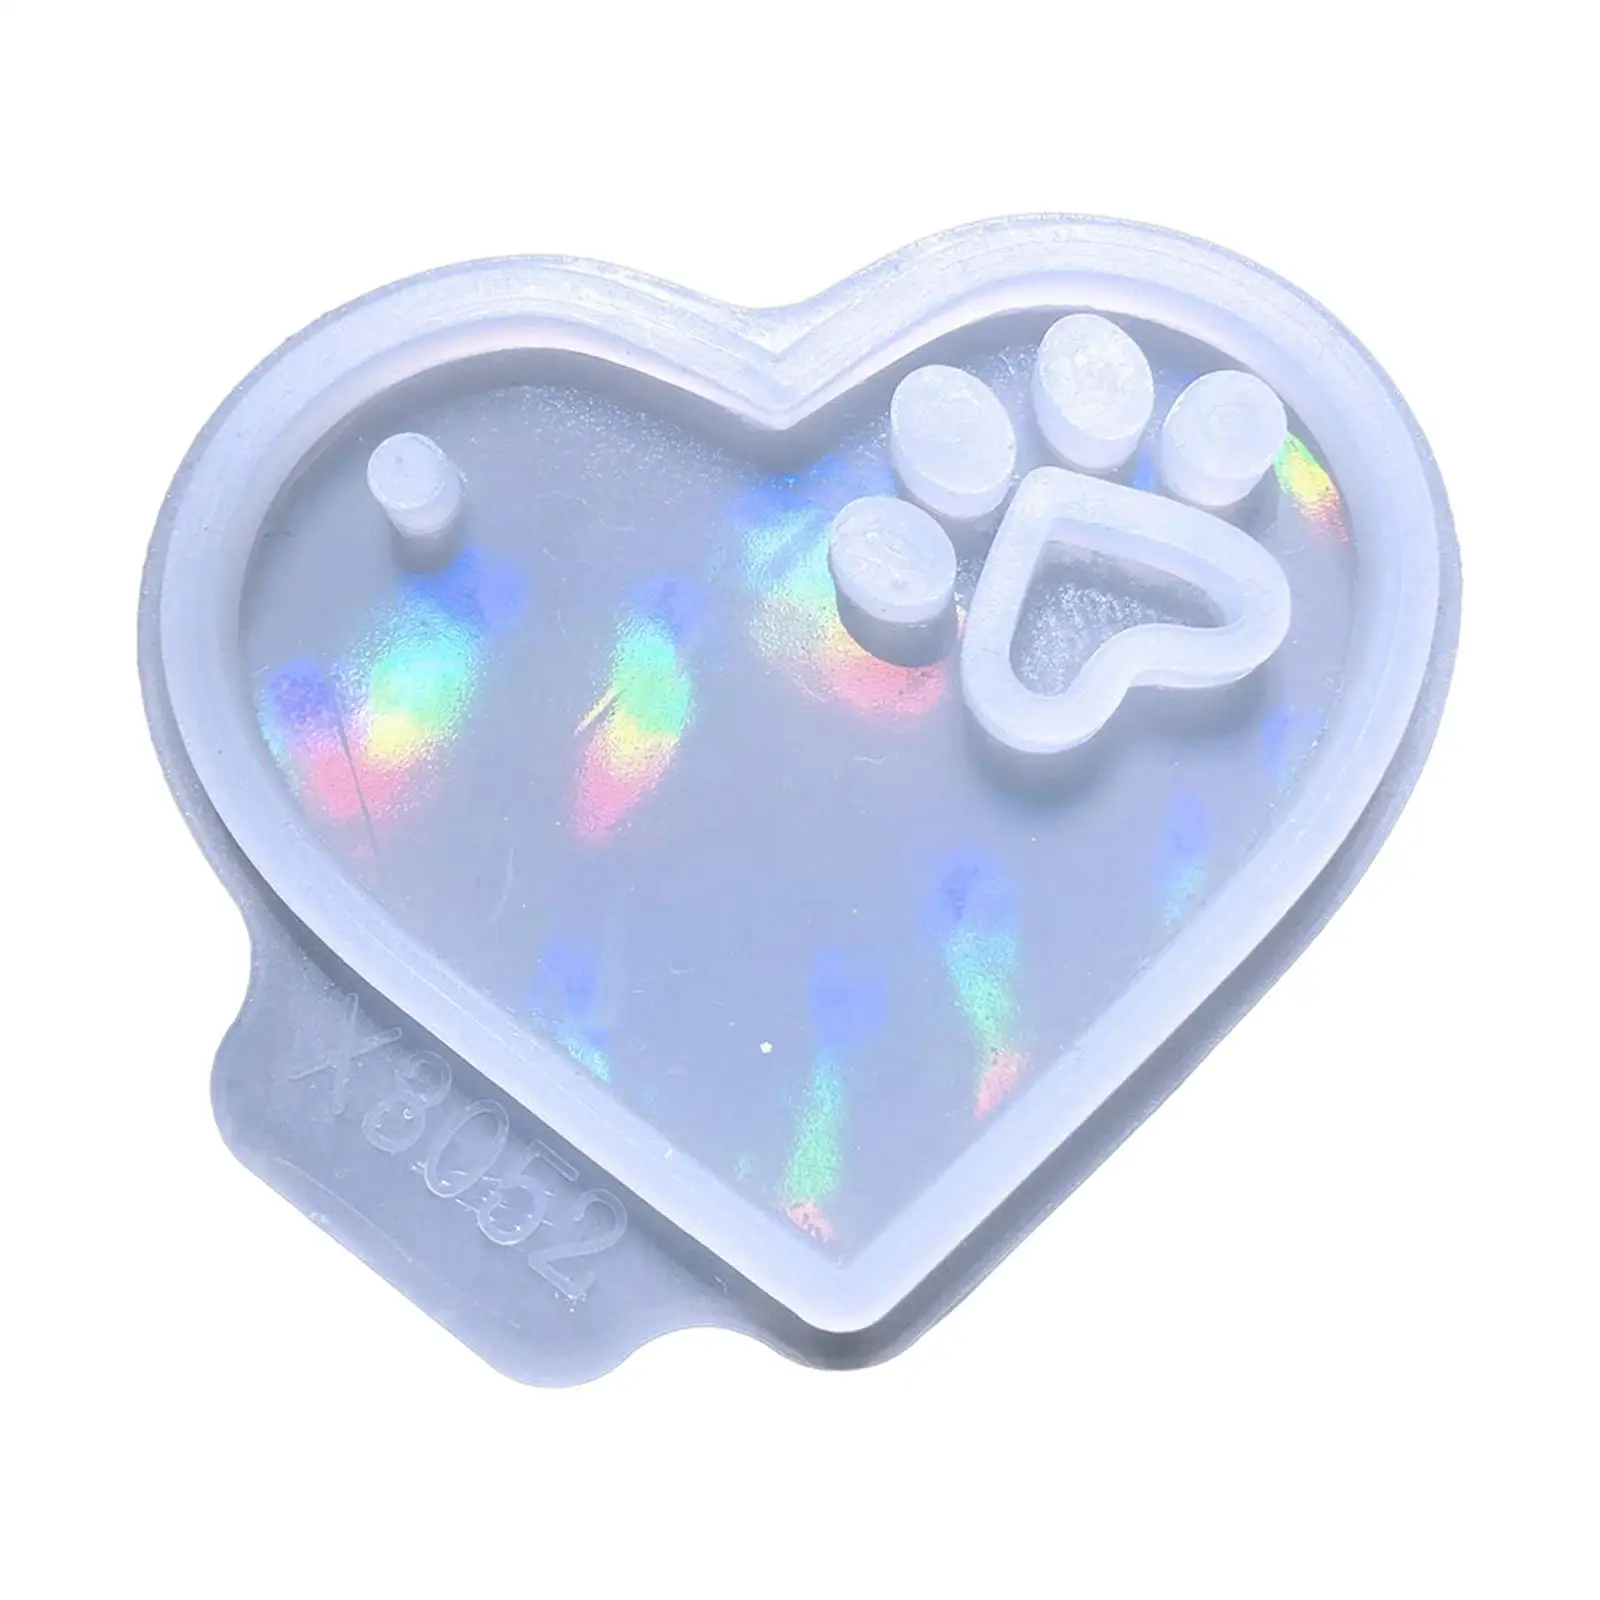 Reusable Love Resin Casting Mould DIY Epoxy Heart Shape Silicone Mould for Earrings